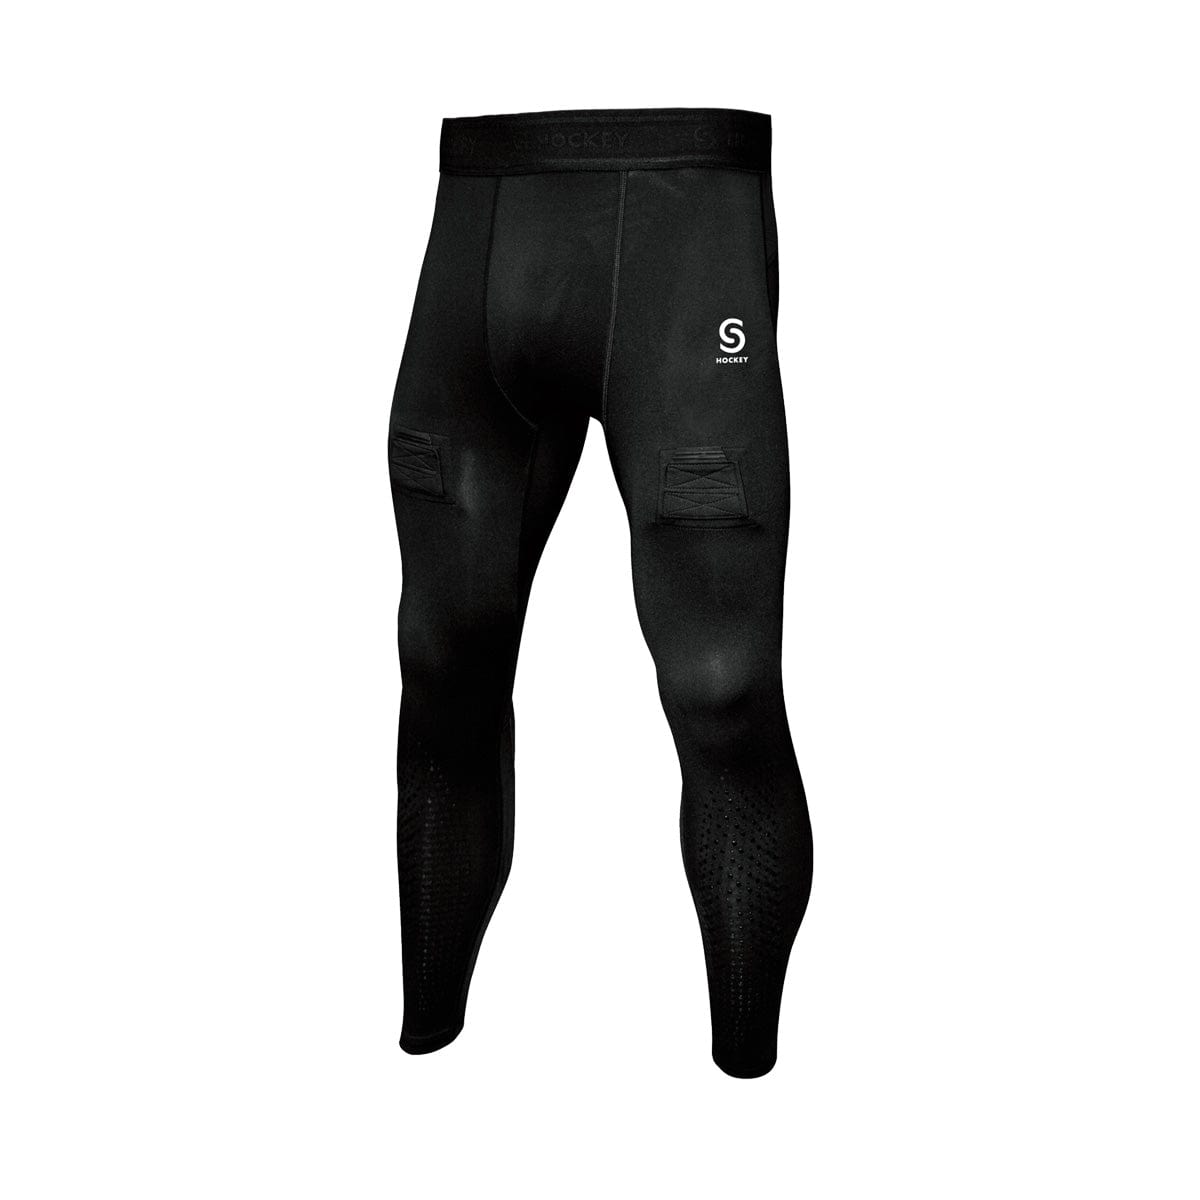 Source for Sports Senior Compression Jock Pants - The Hockey Shop Source For Sports